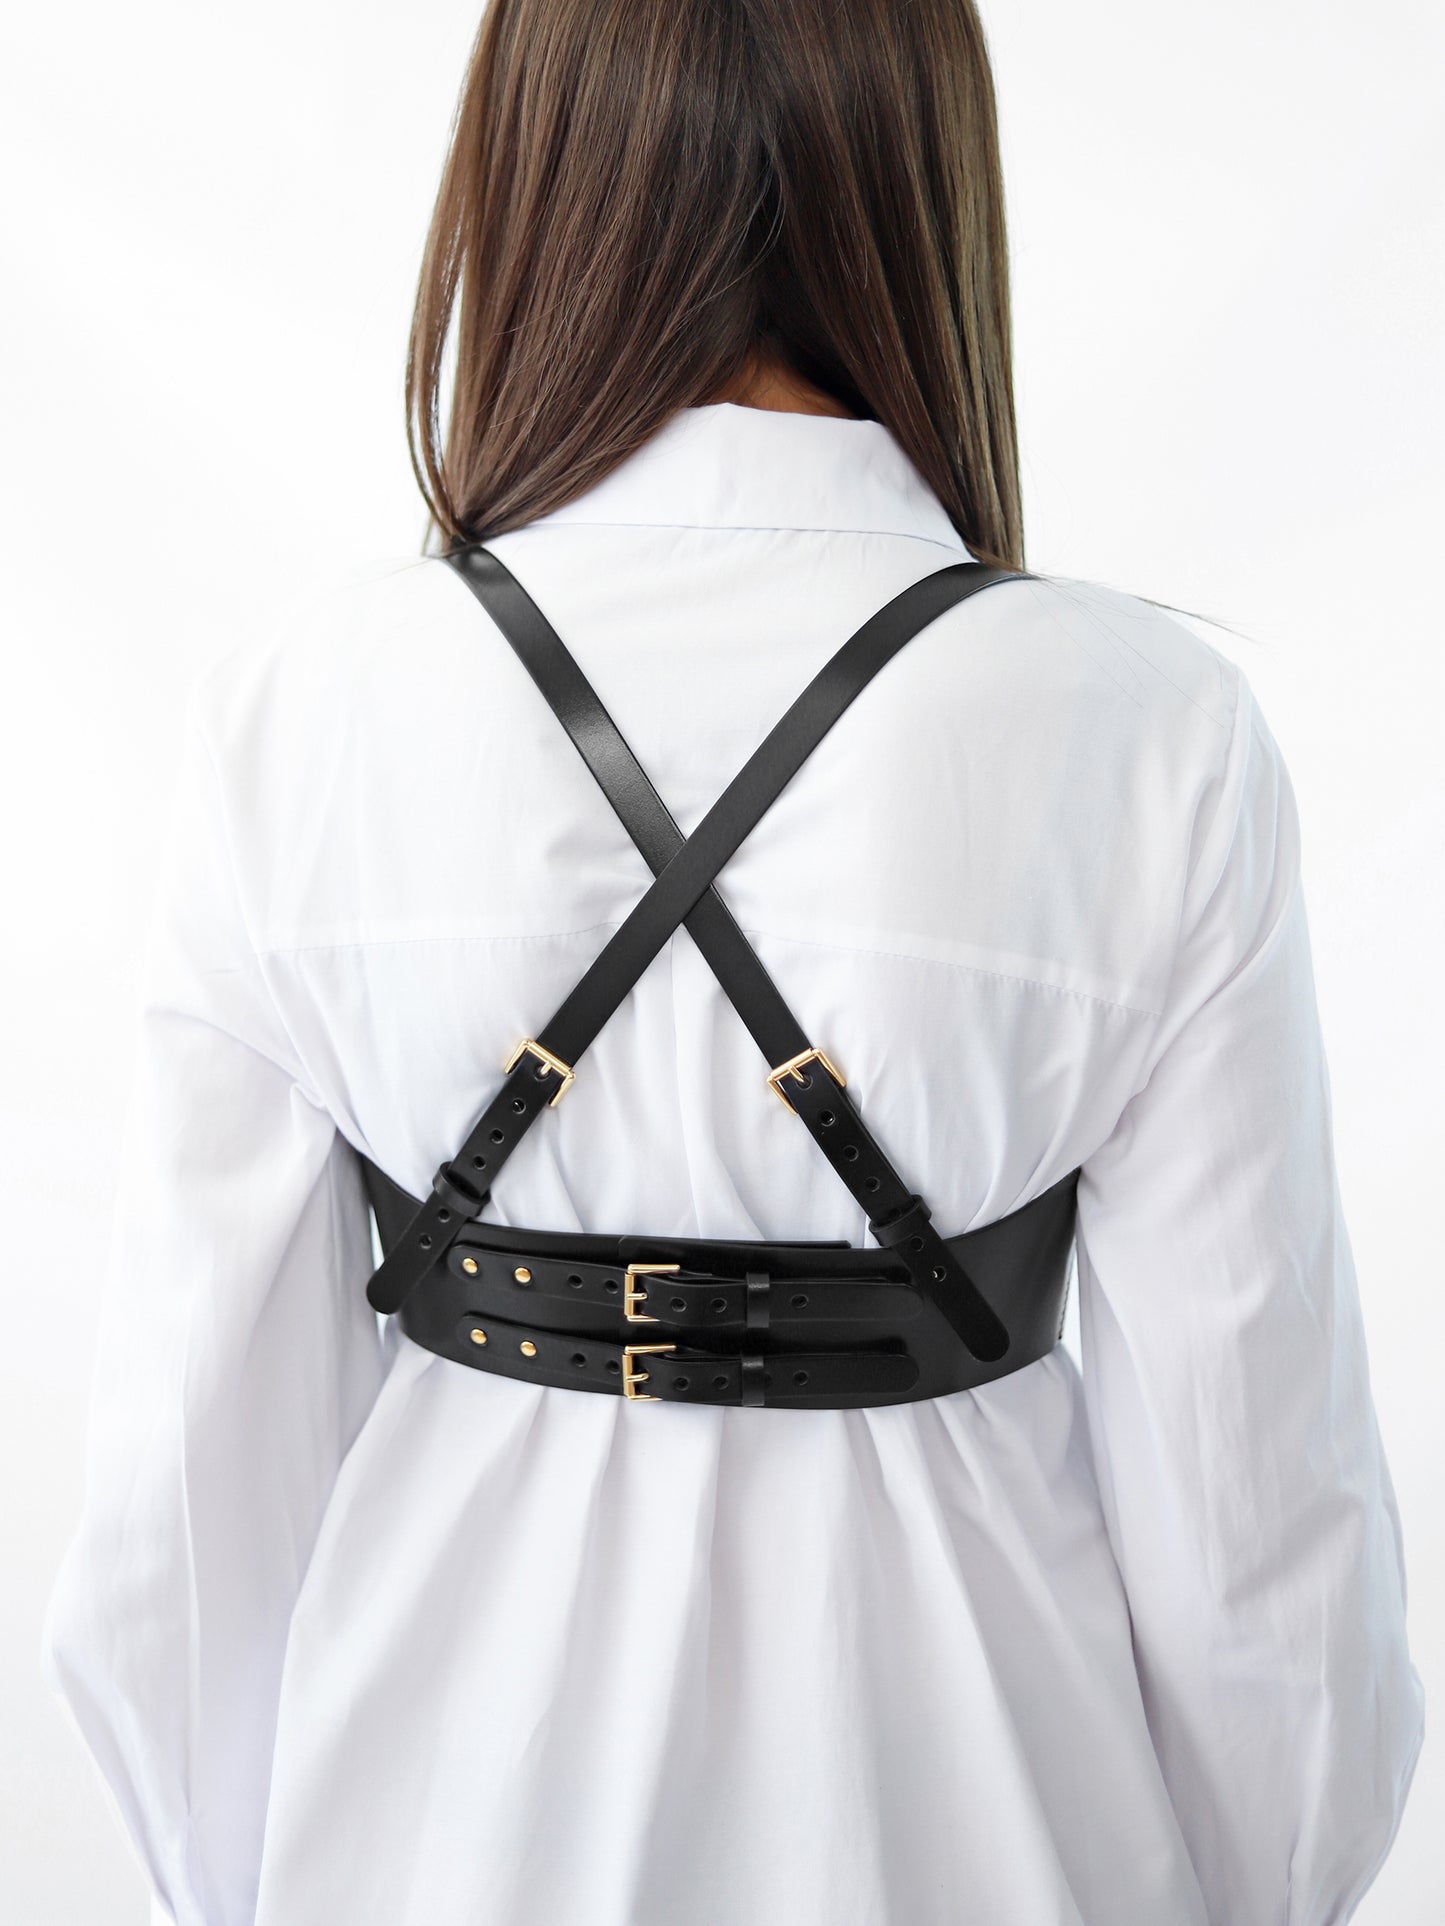 Back view of black underbust corset harness.